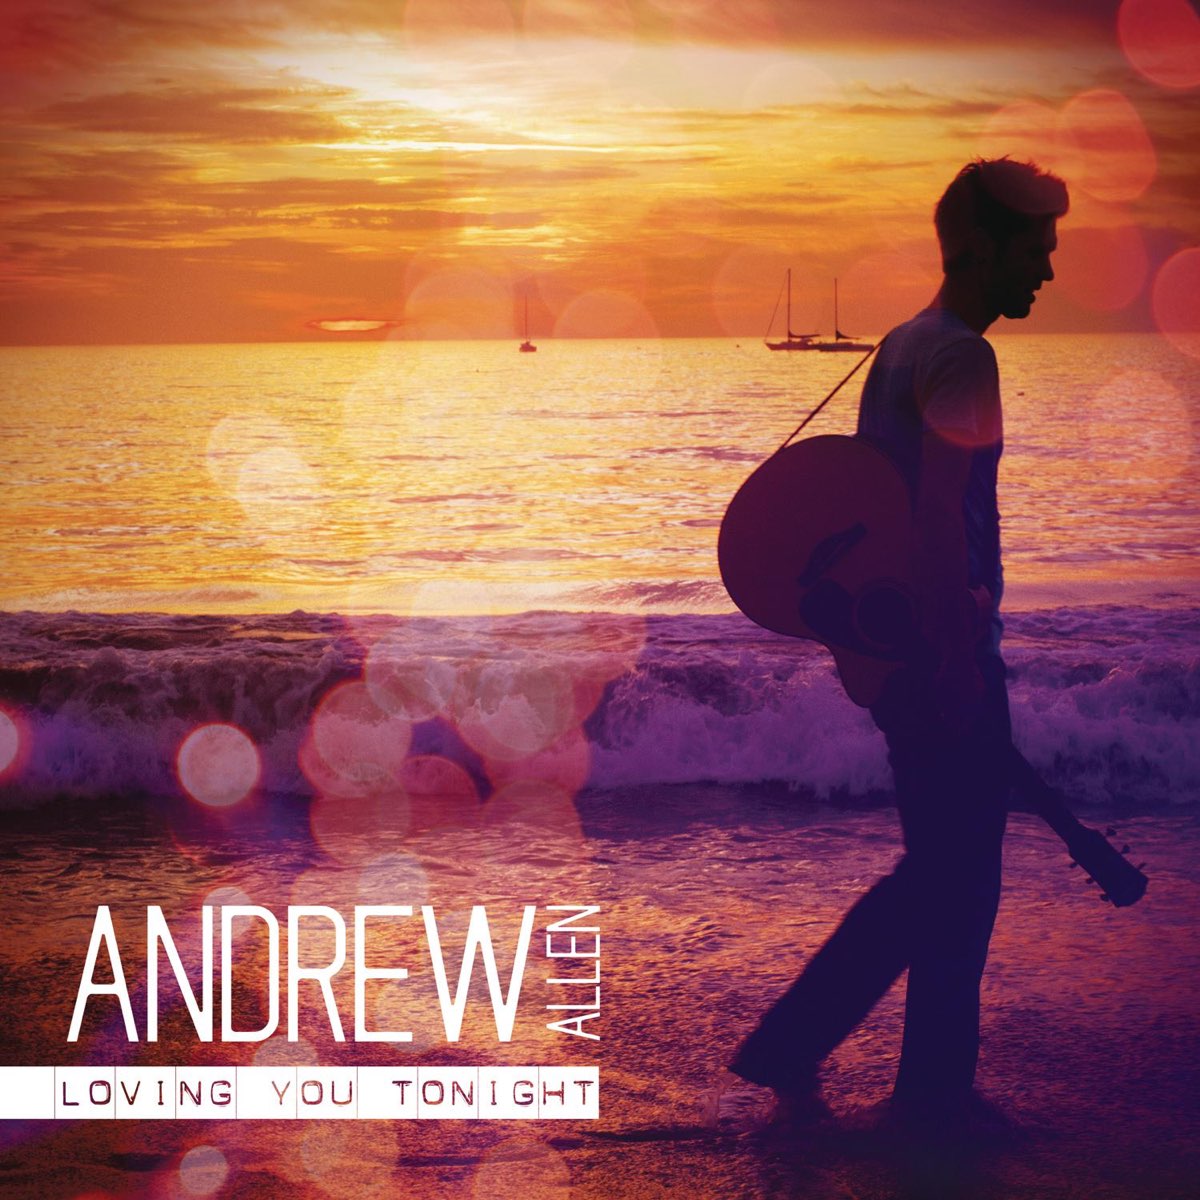 I want see you tonight. Loving you. Andy Love. Andrew Love. Love Tonight.